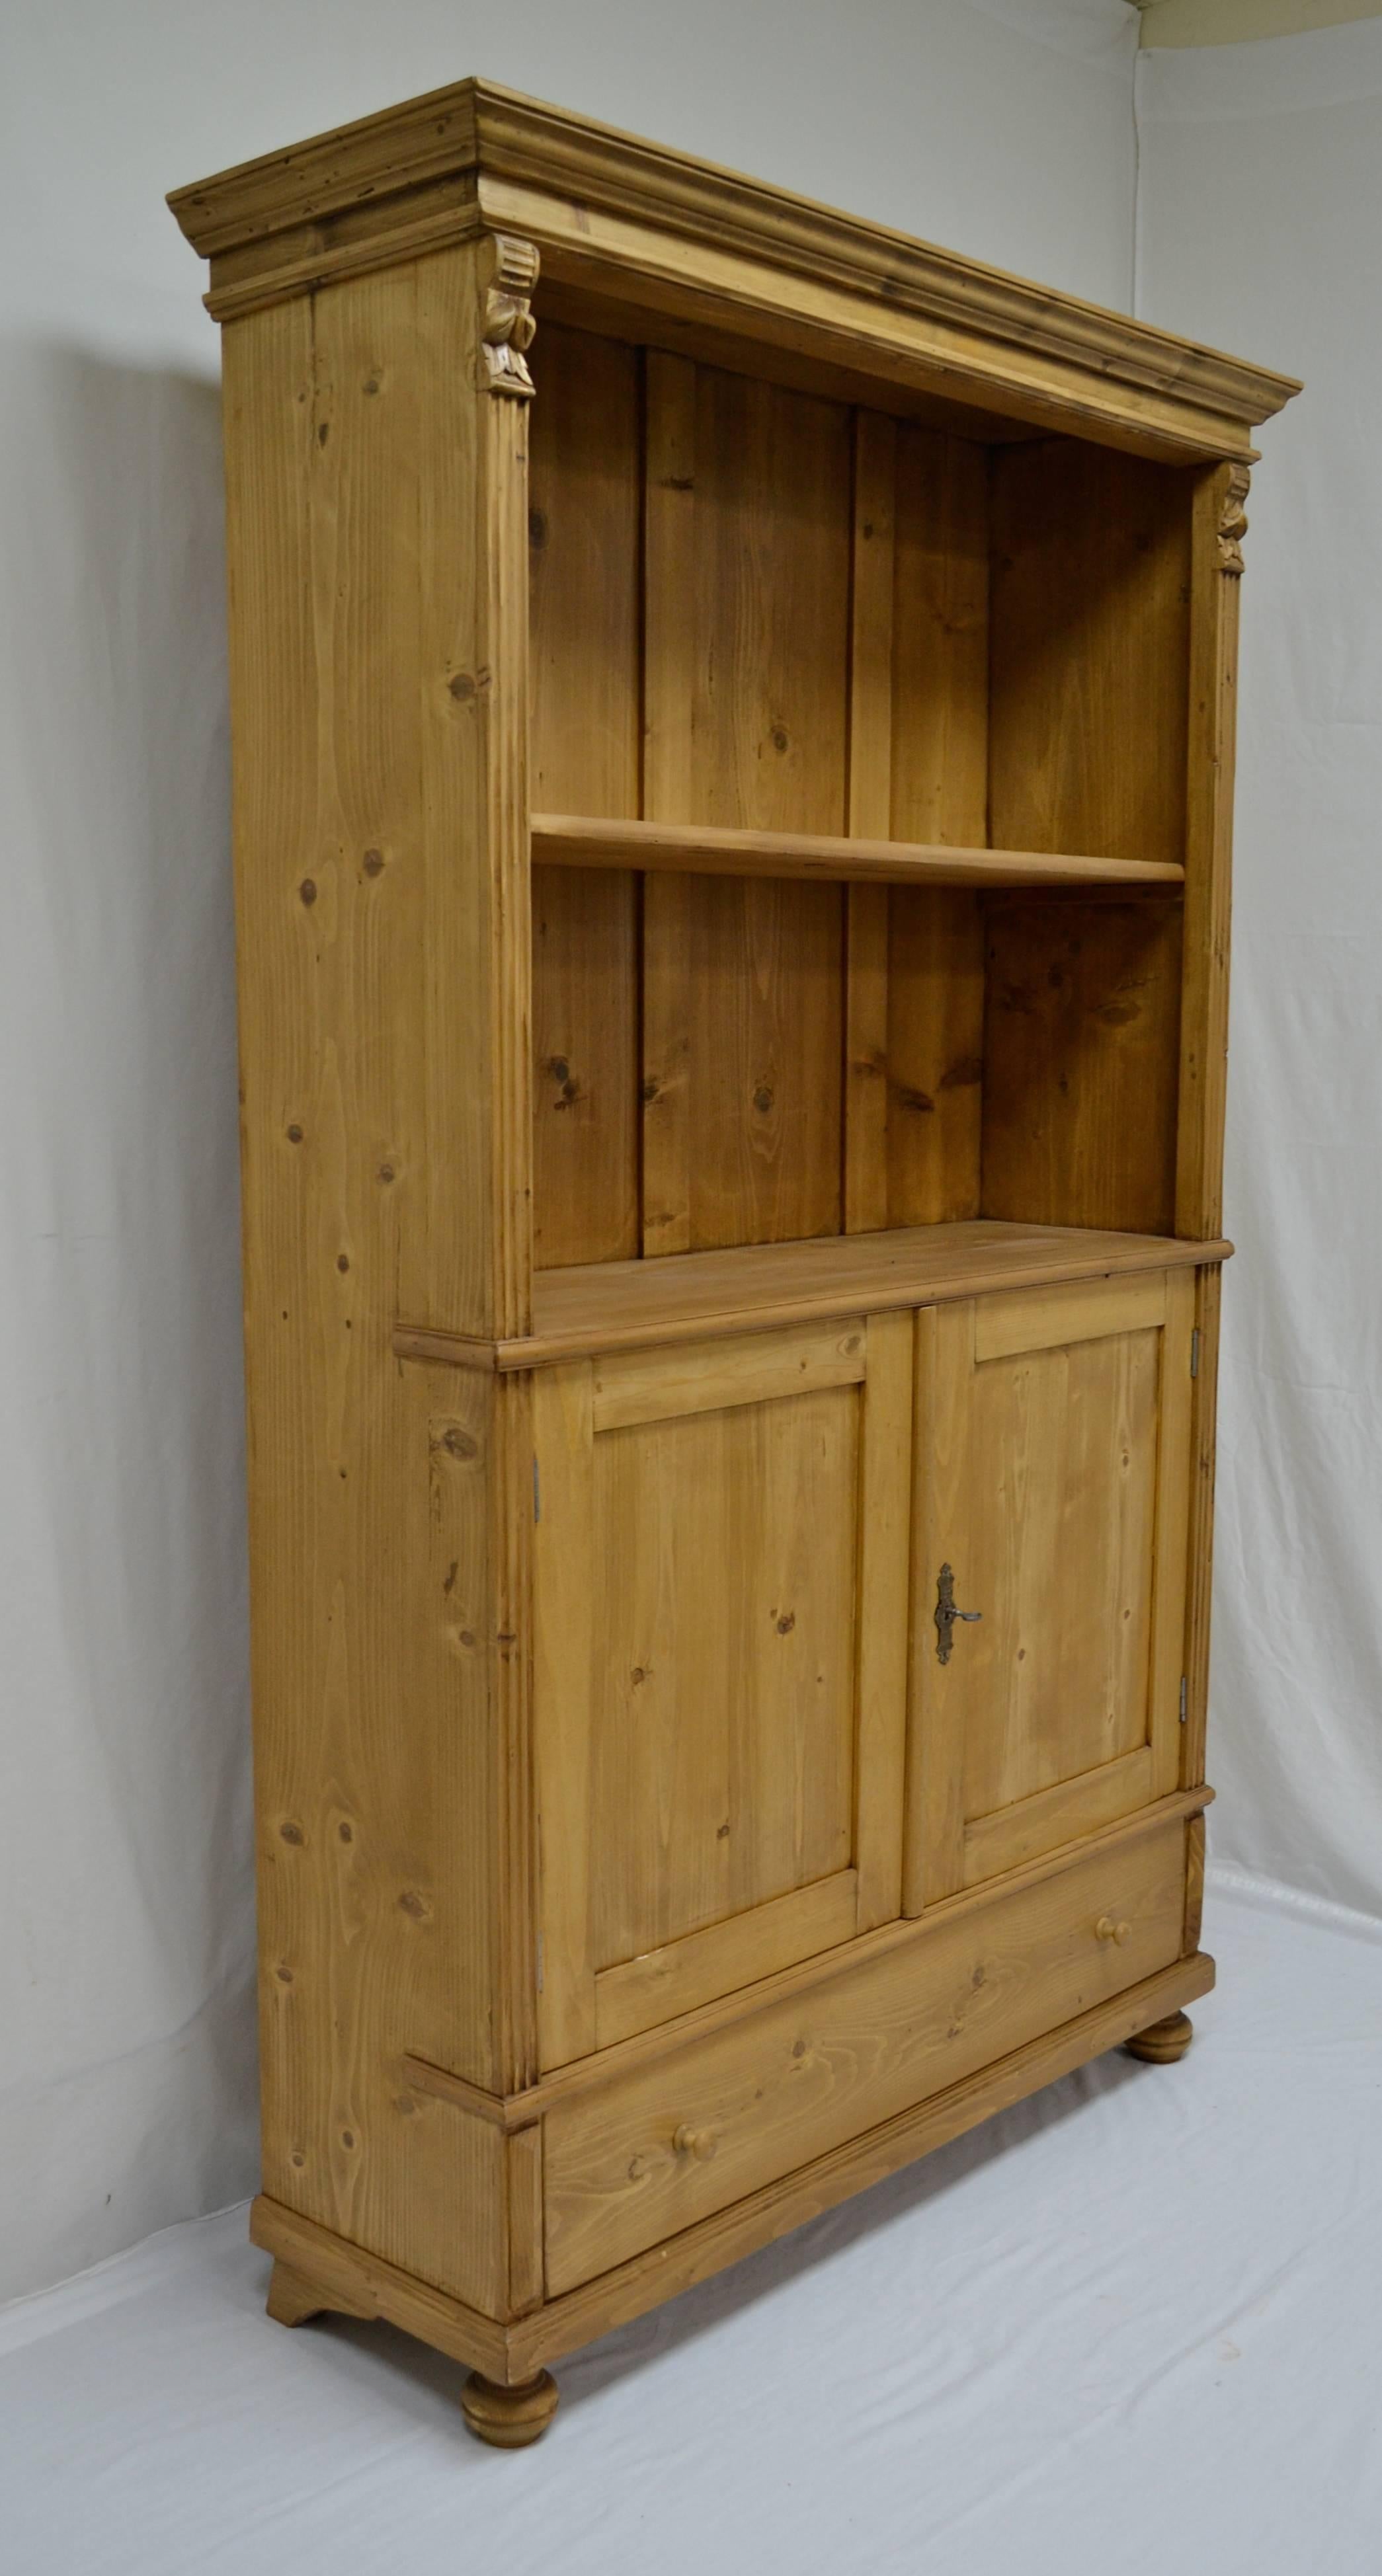 Antique pine bookcases are hard to find so the shell of this piece was provided by a vintage armoire. With one board width removed from the sides and the original backboards and crown molding retained; with the doors cut down, and the drawer reduced